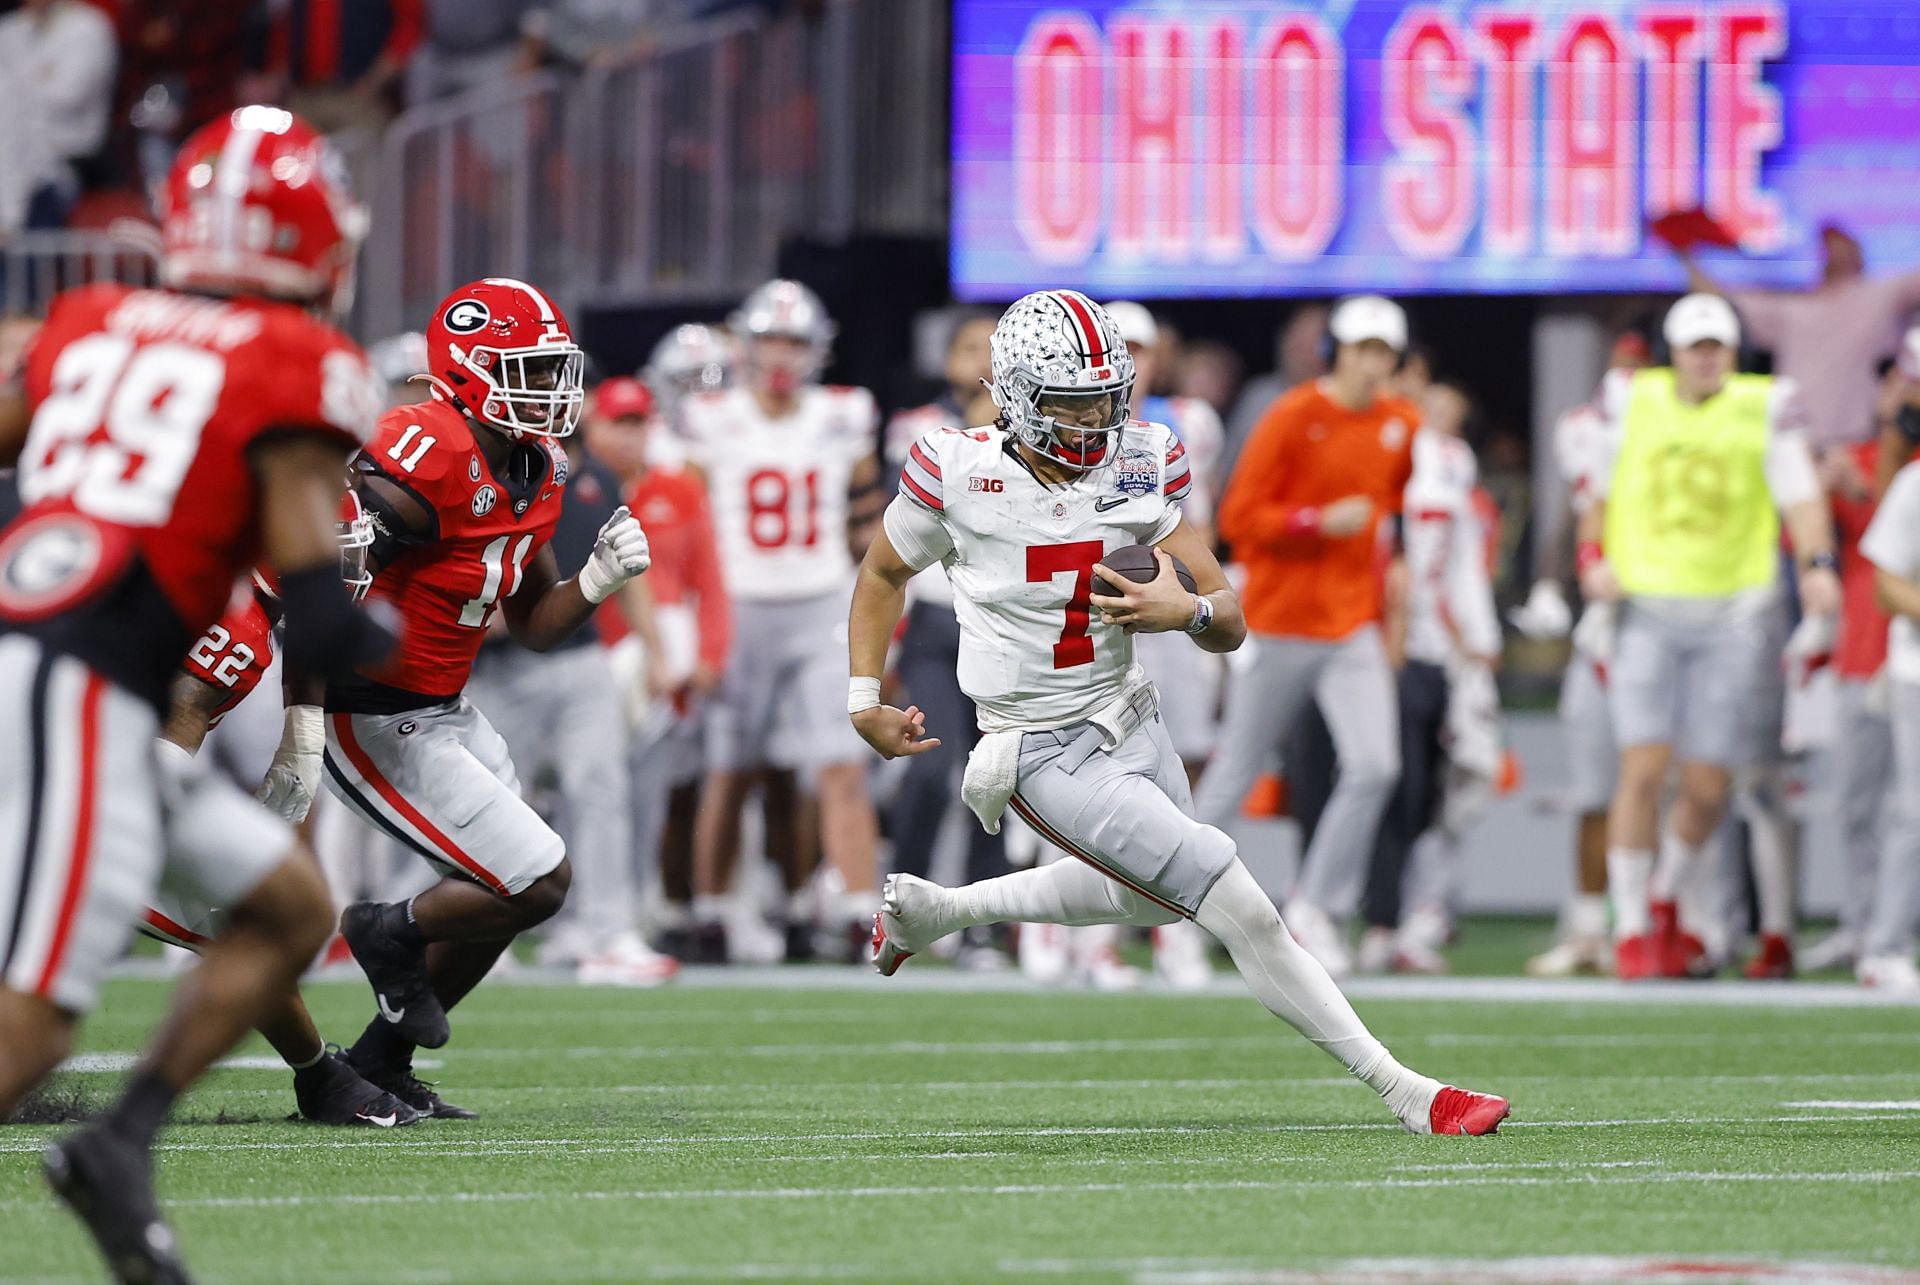 C.J. Stroud #7 of the Ohio State Buckeyes rushes during the fourth quarter against the Georgia Bulldogs